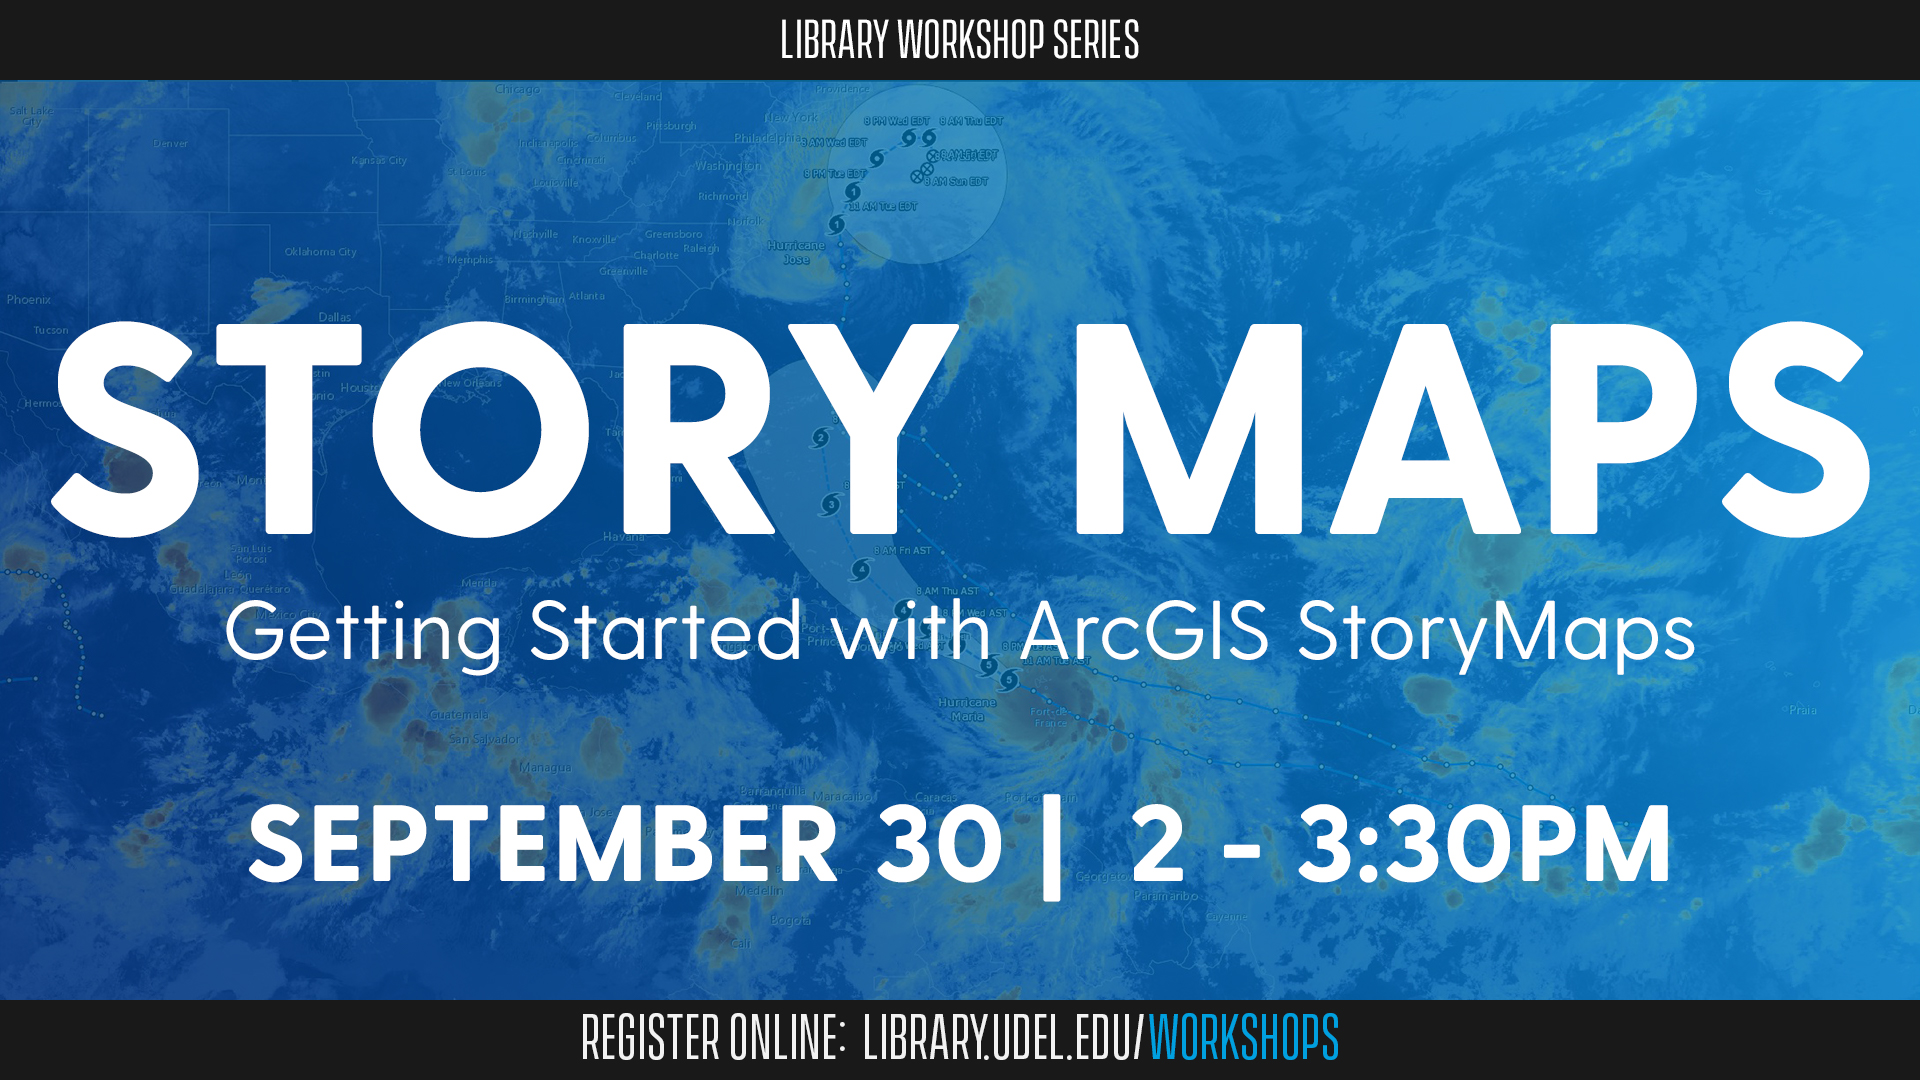 Getting Started with ArcGIS StoryMaps